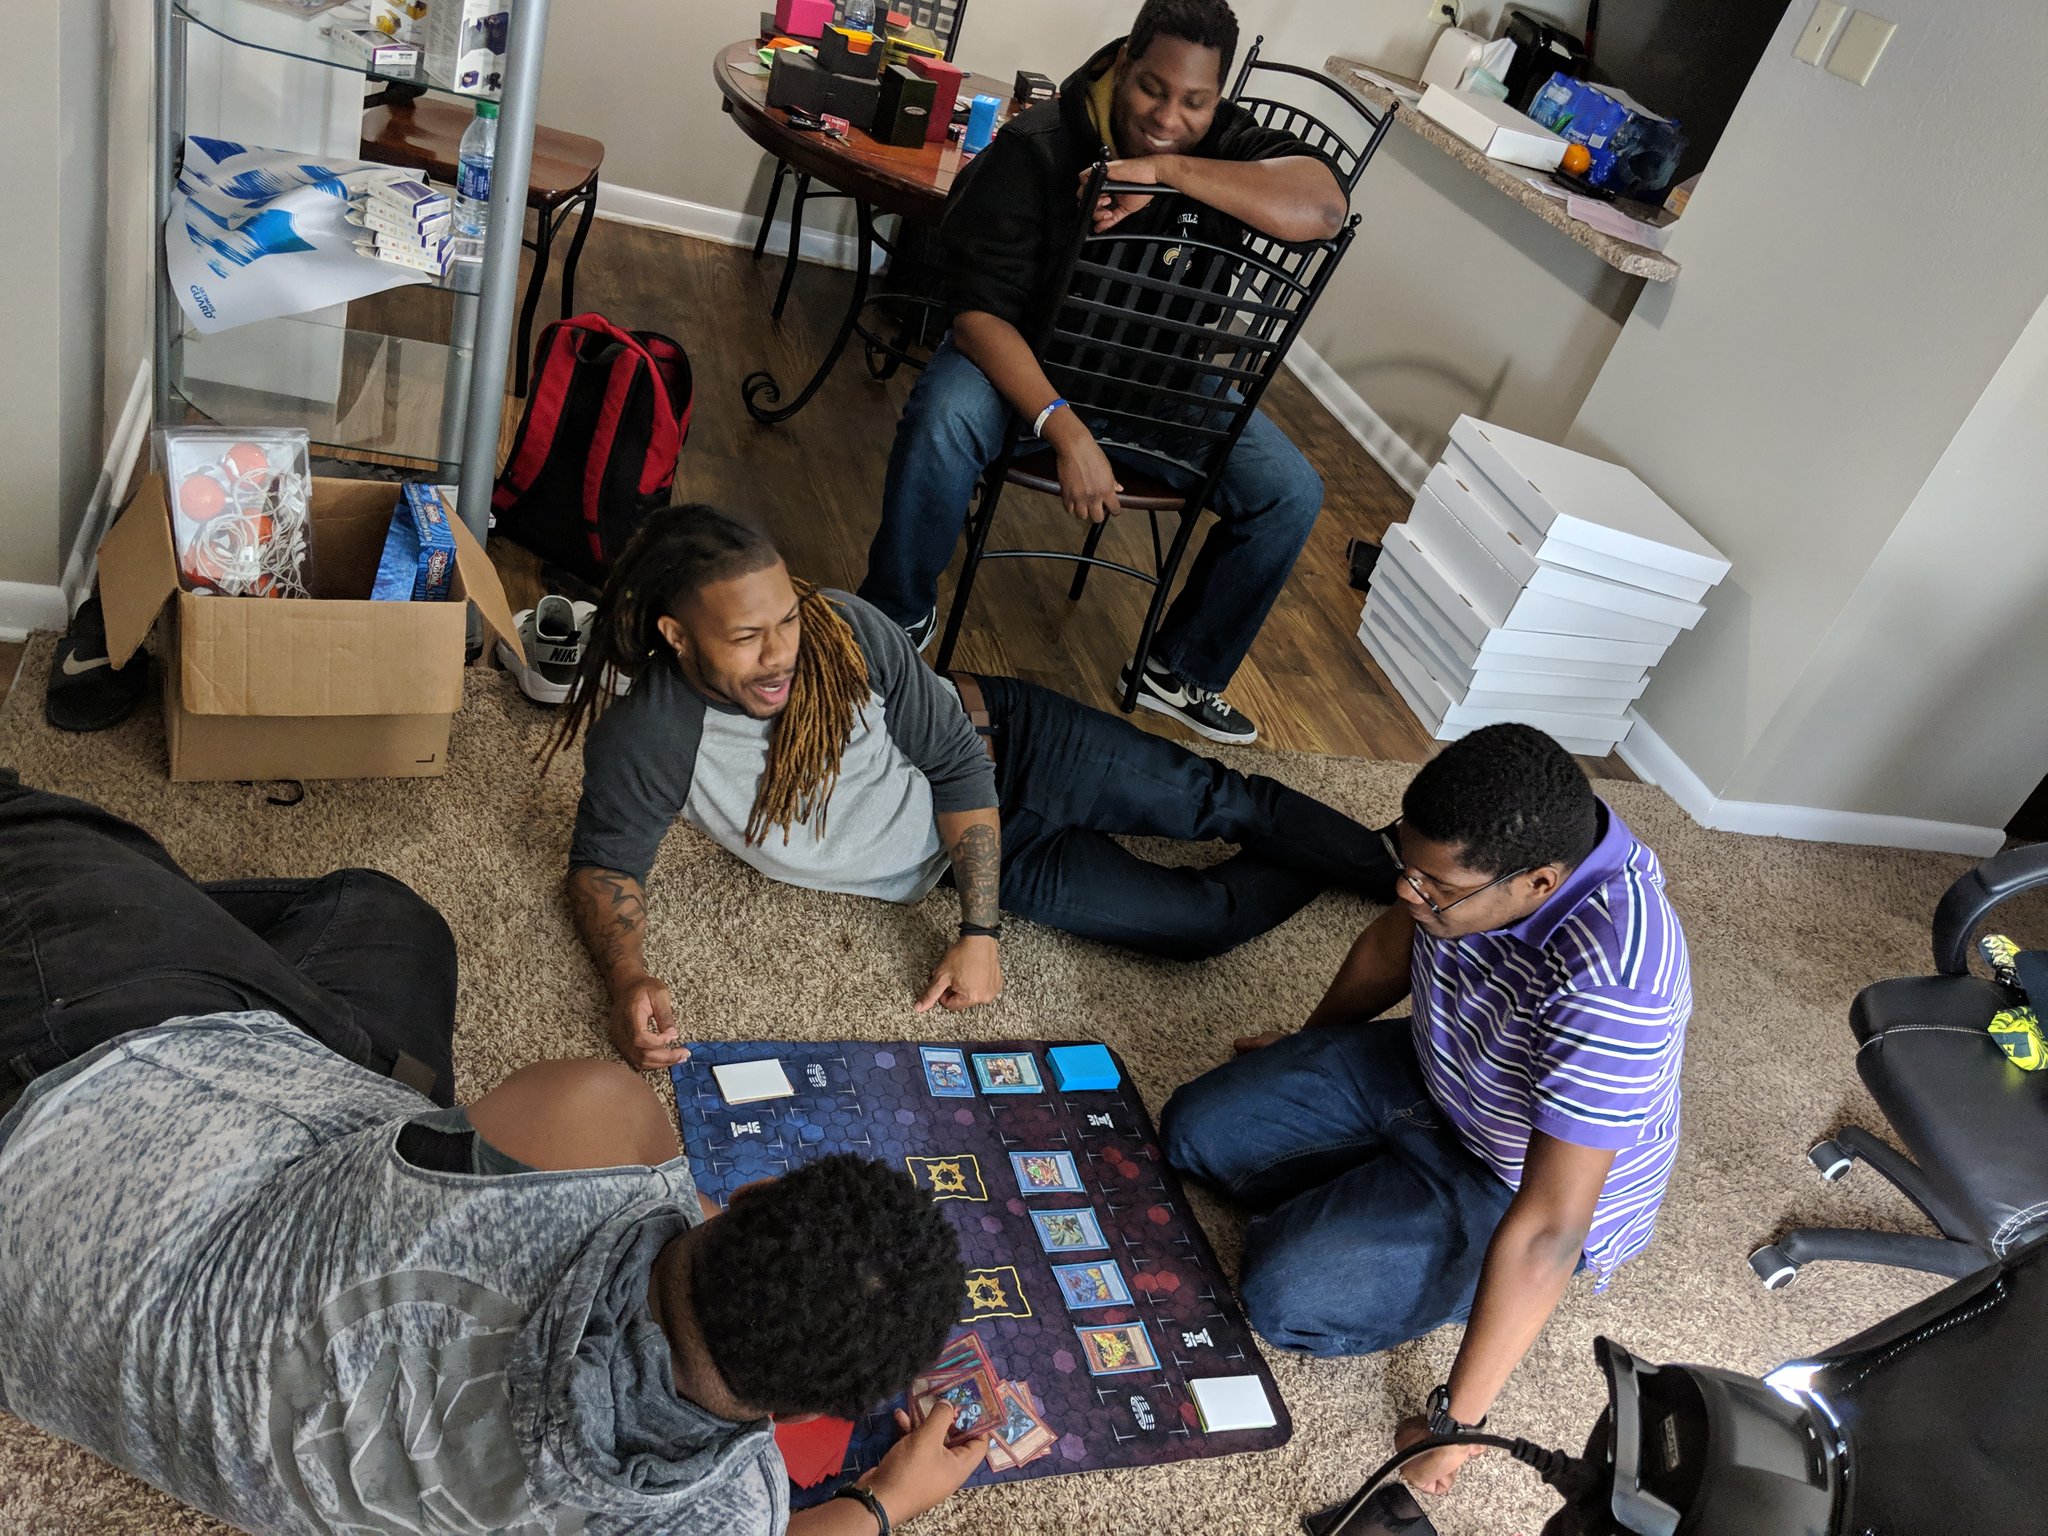 Team Aps On Twitter Fun Wholesome Yu Gi Oh Play Session